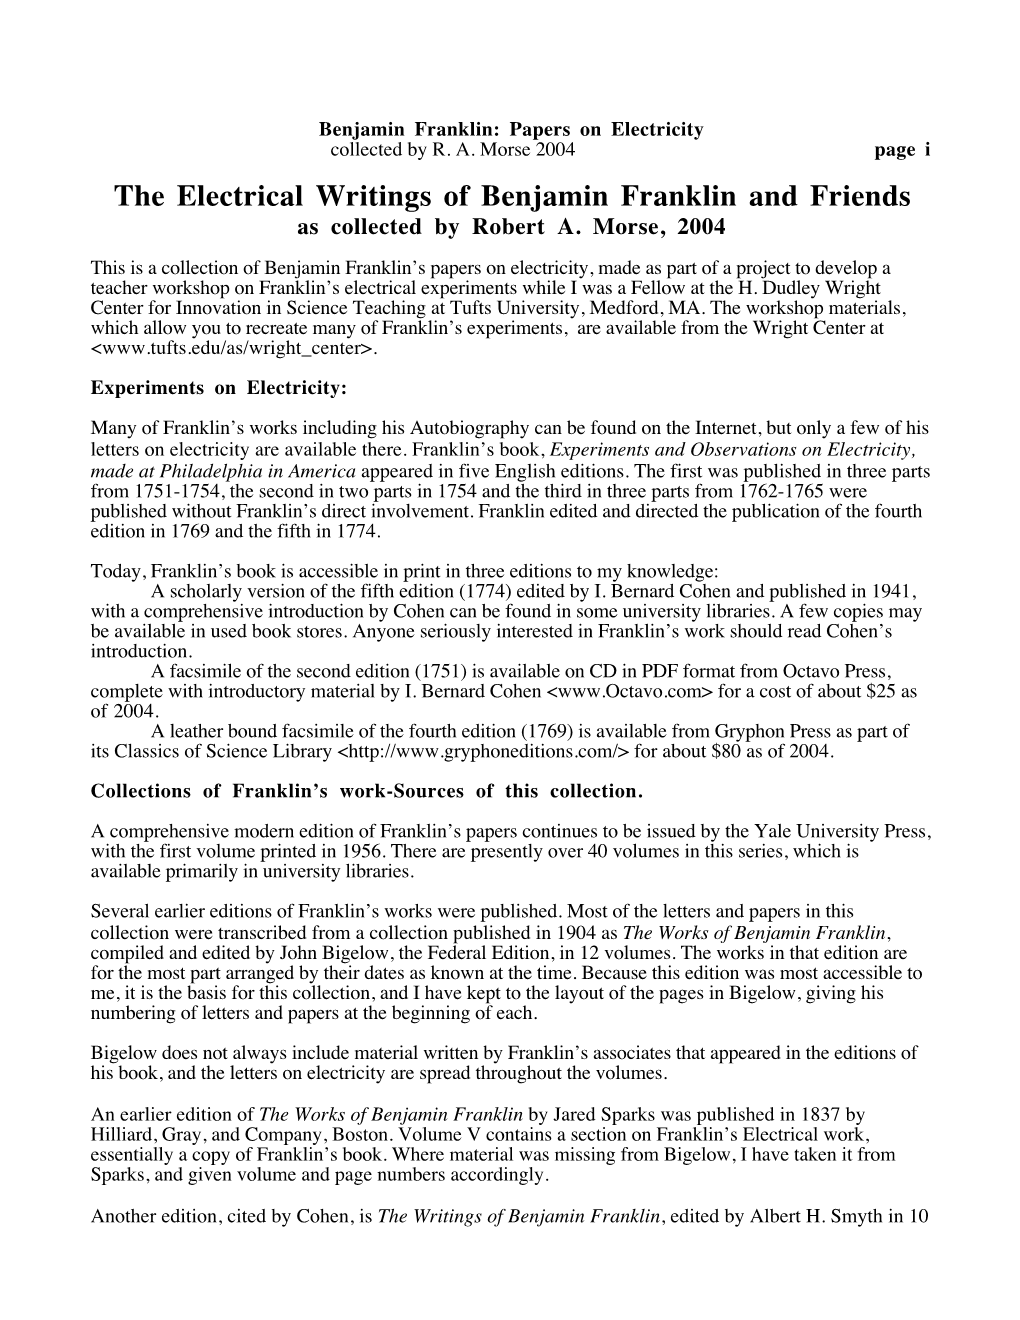 The Electrical Writings of Benjamin Franklin and Friends As Collected by Robert A